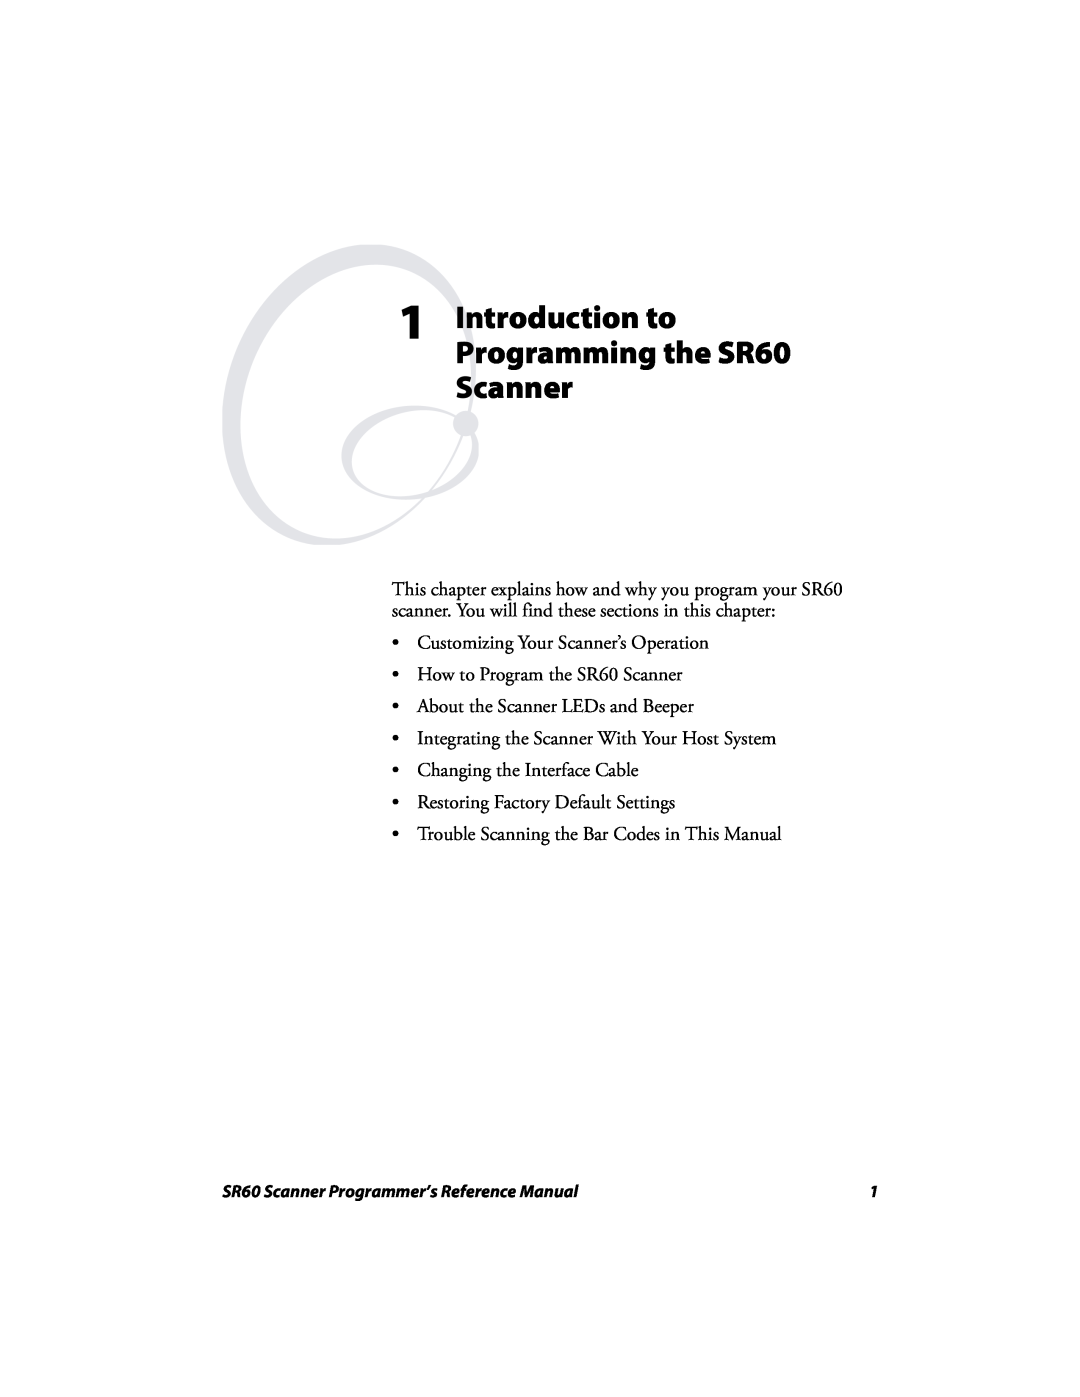 Intermec manual Introduction to Programming the SR60 Scanner 